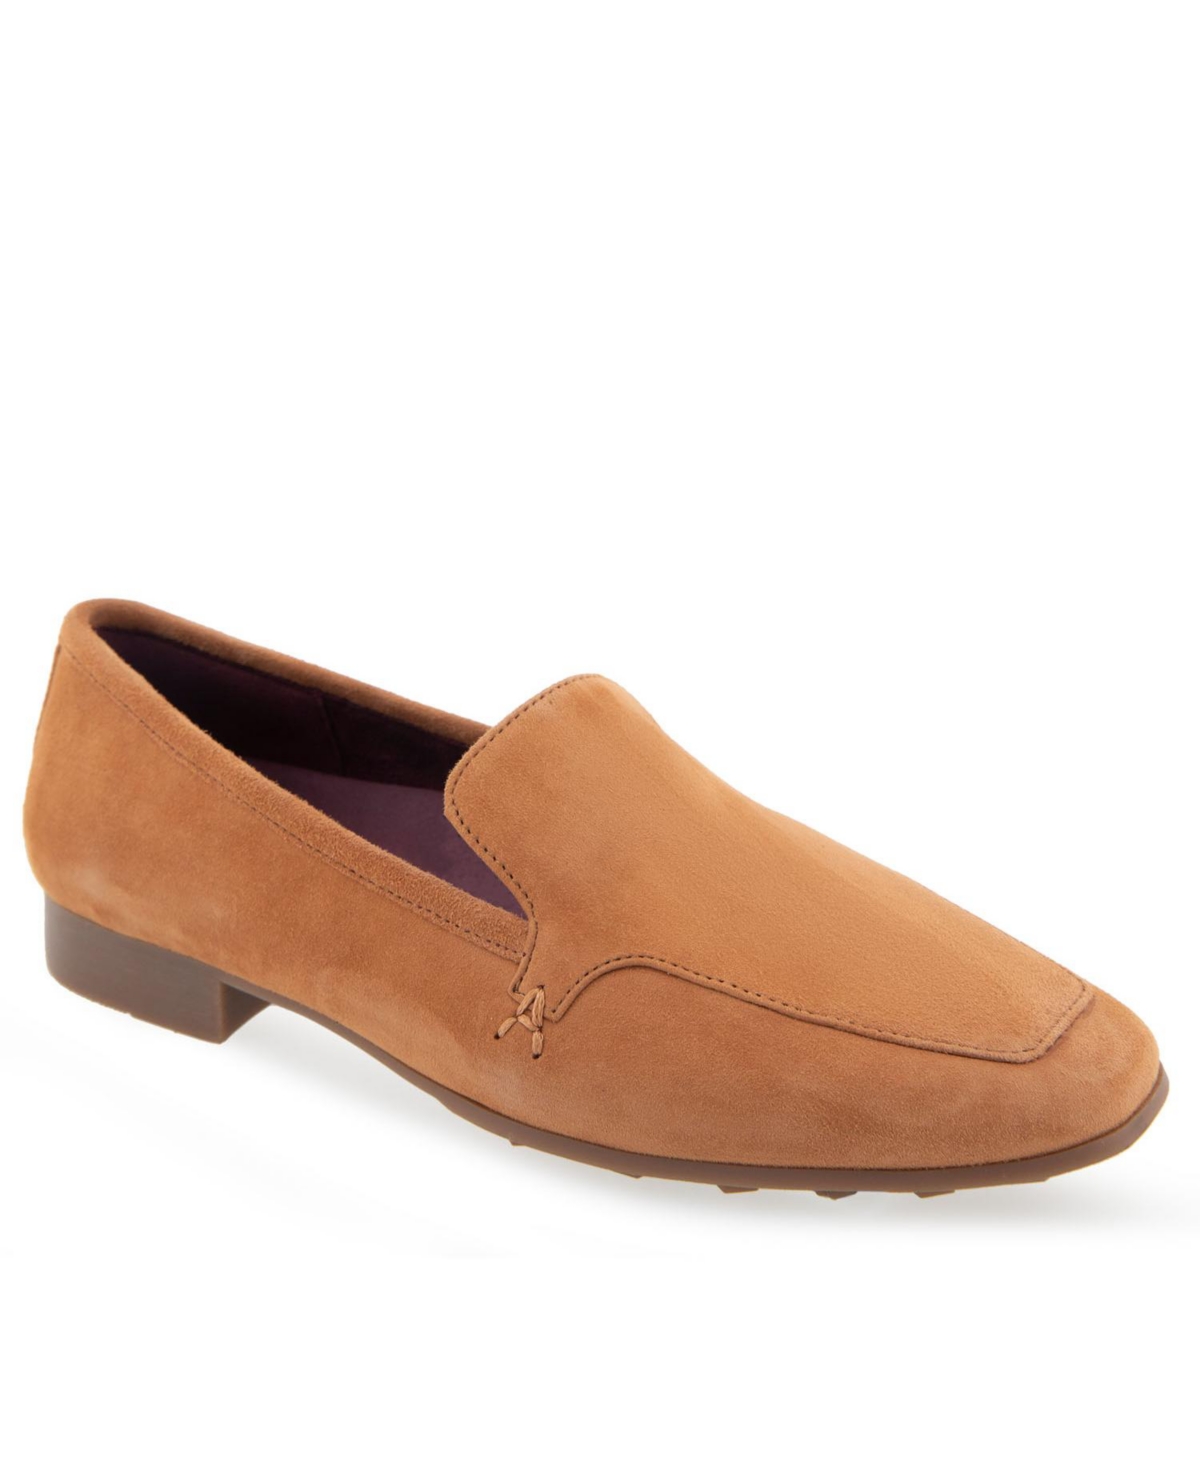 Paynes Tailored-Loafer - Tan Leather